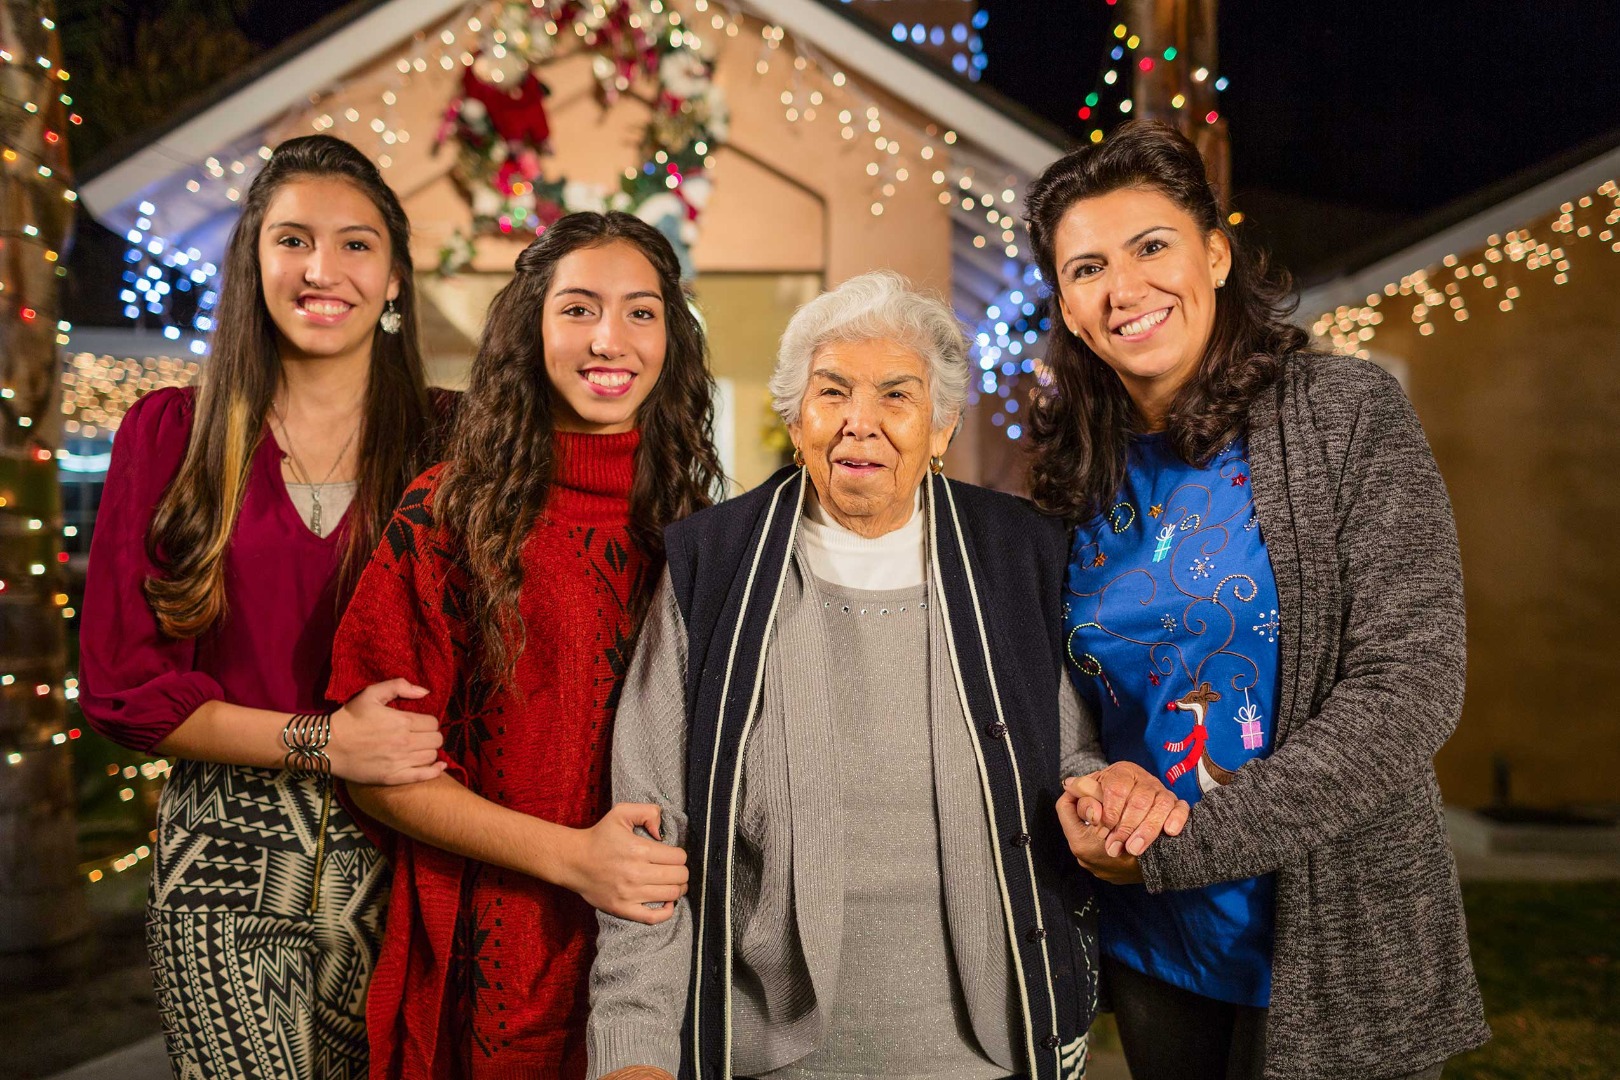 Grandmother with her daughter and granddaughters standing together during the Christmas season.